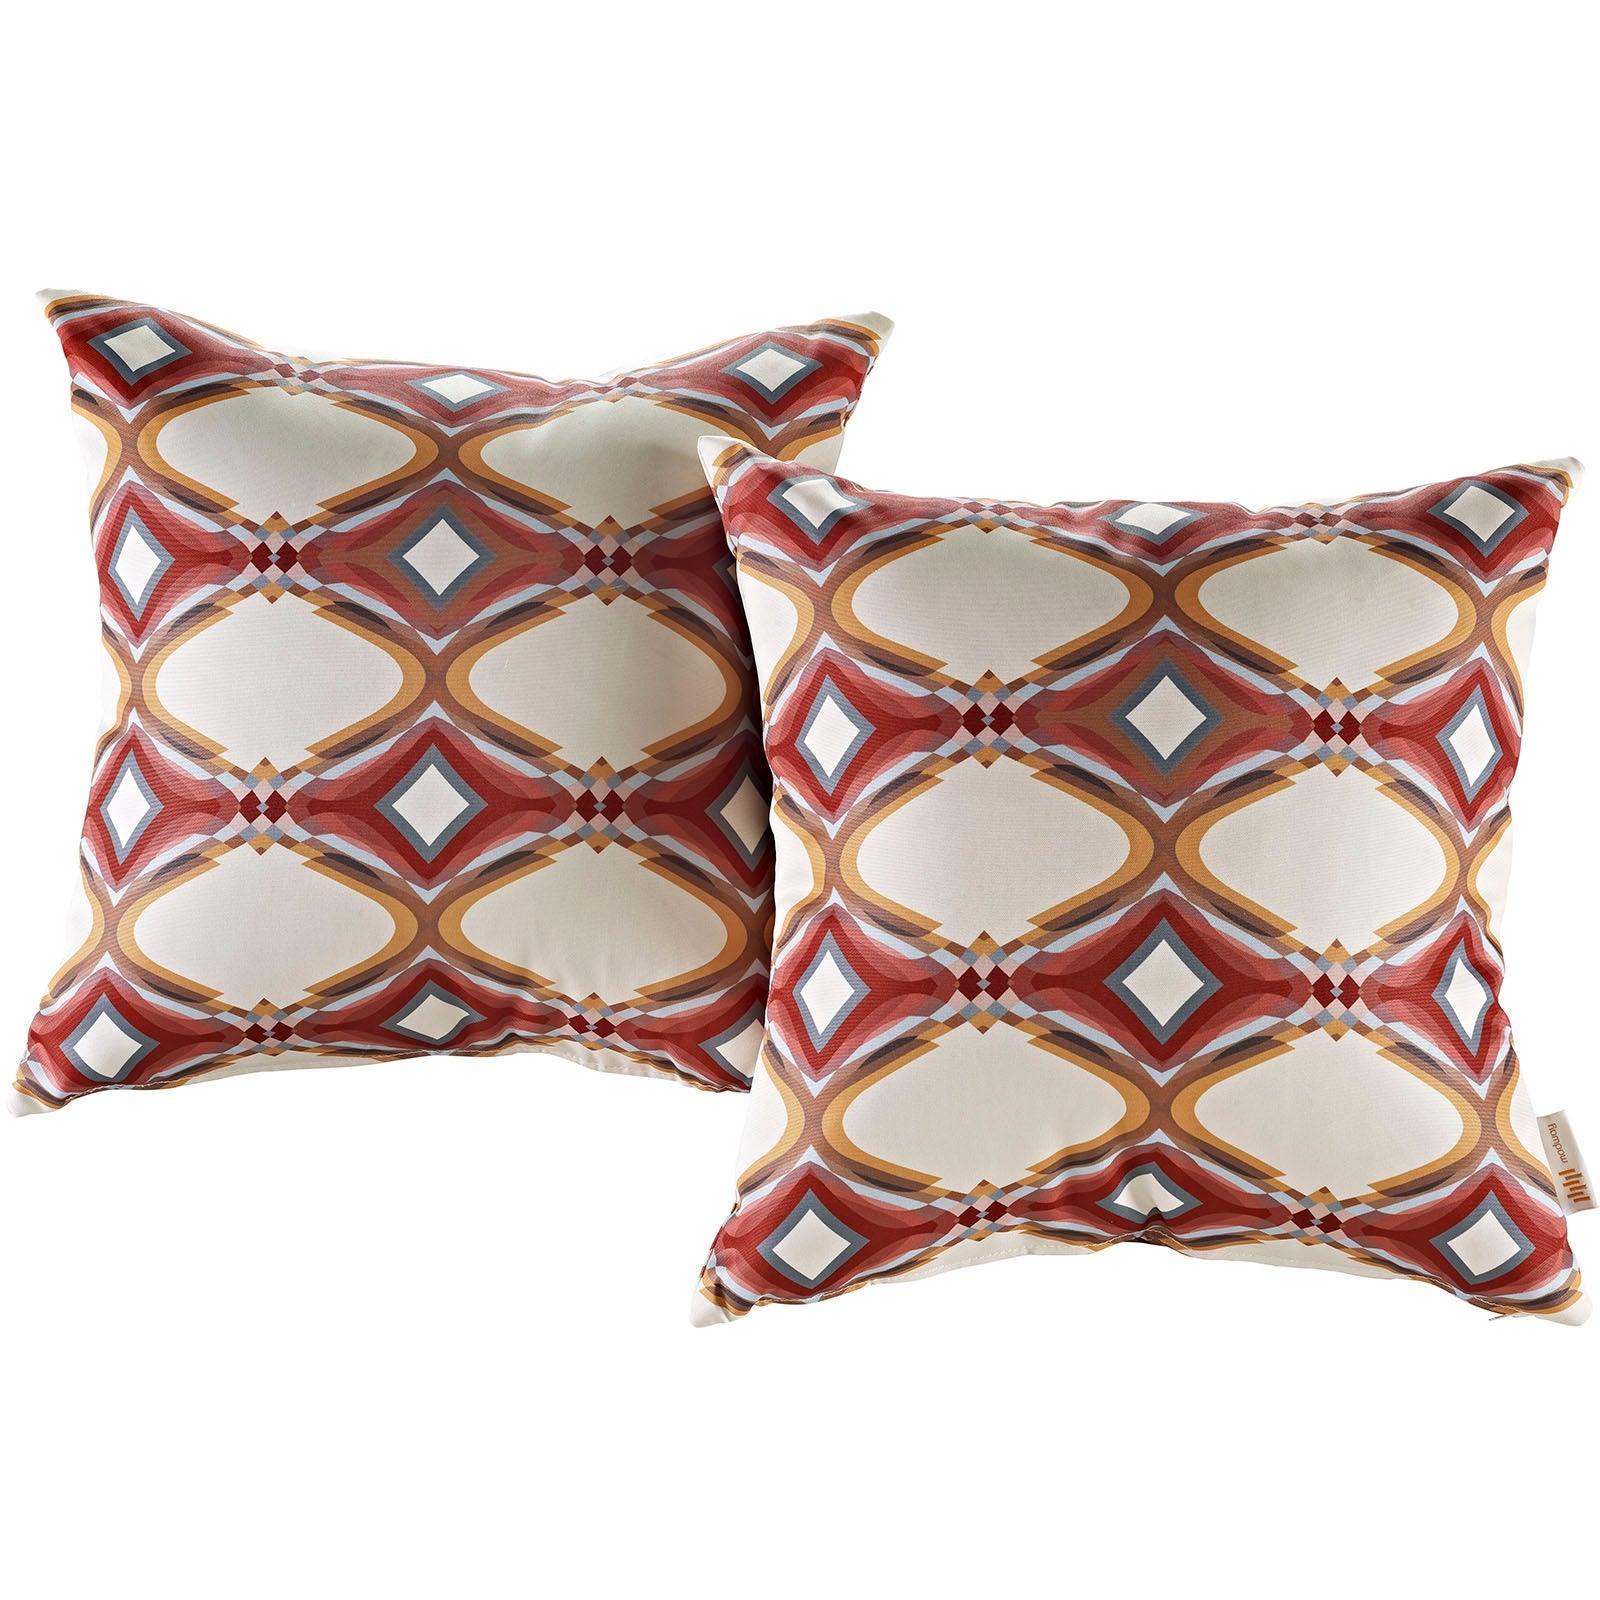 Modway Modway Two Piece Outdoor Patio Pillow Set FredCo